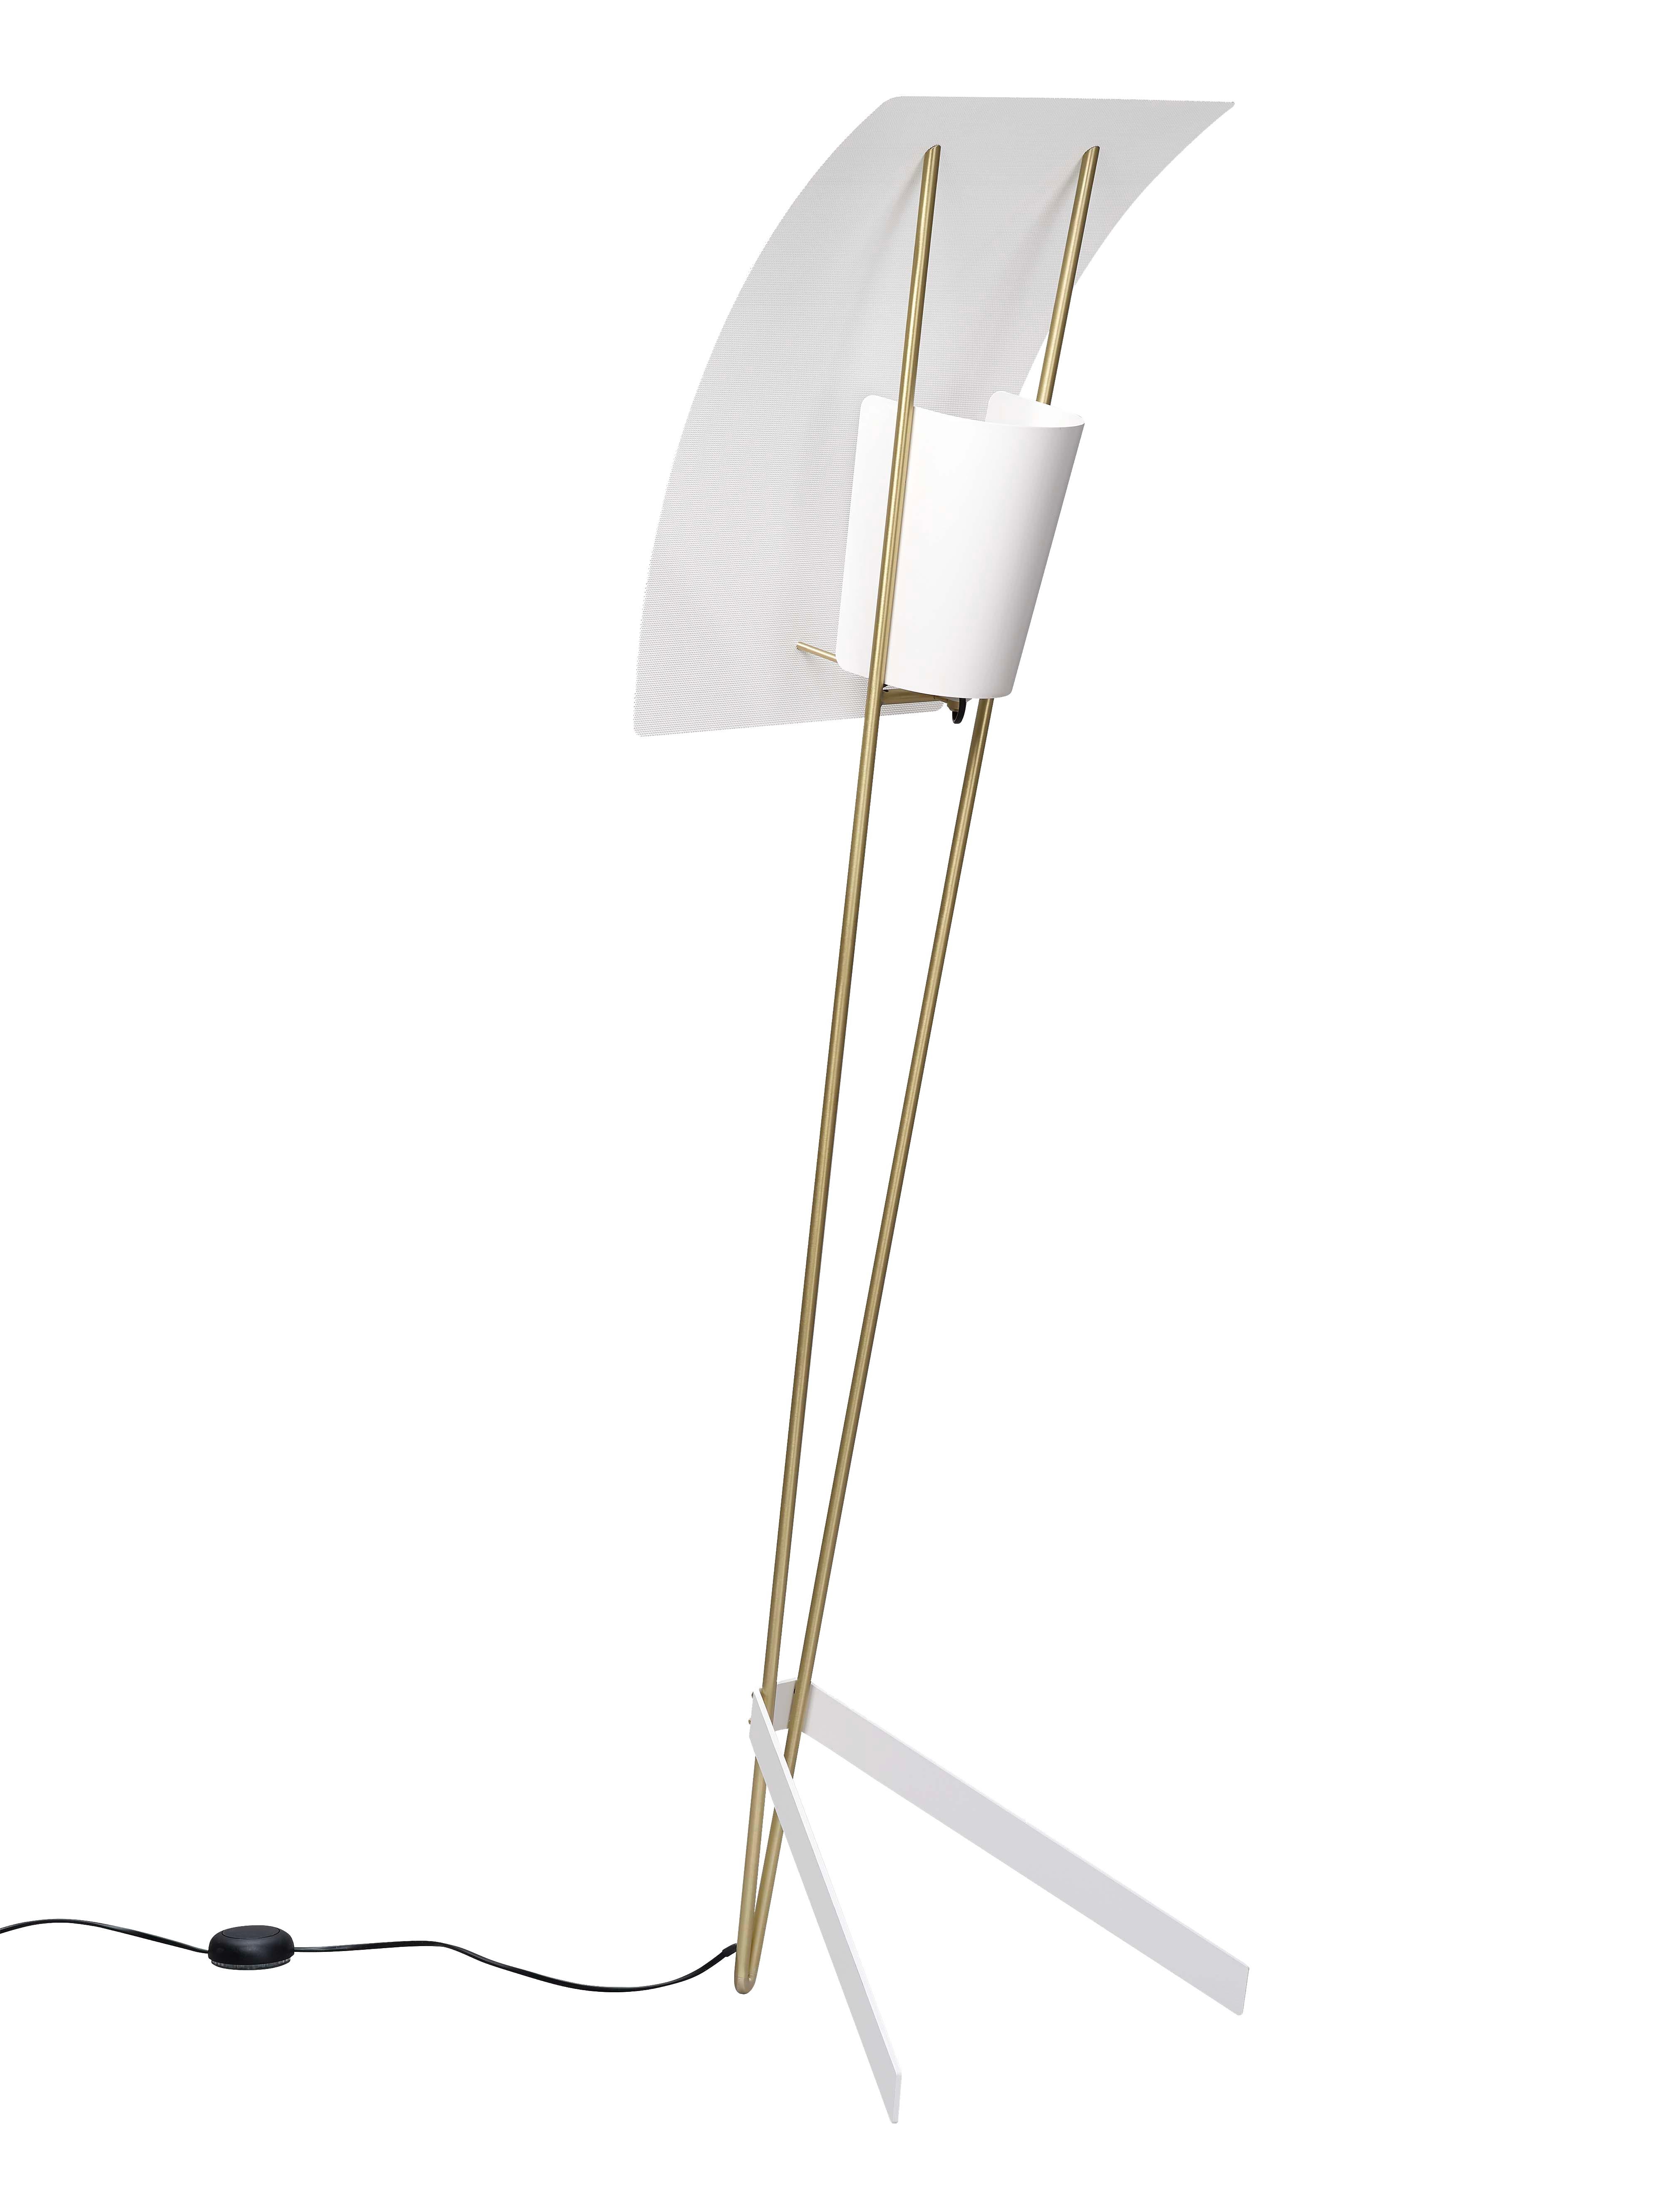 Brushed Pierre Guariche Kite Floor Lamp in White for Sammode Studio For Sale